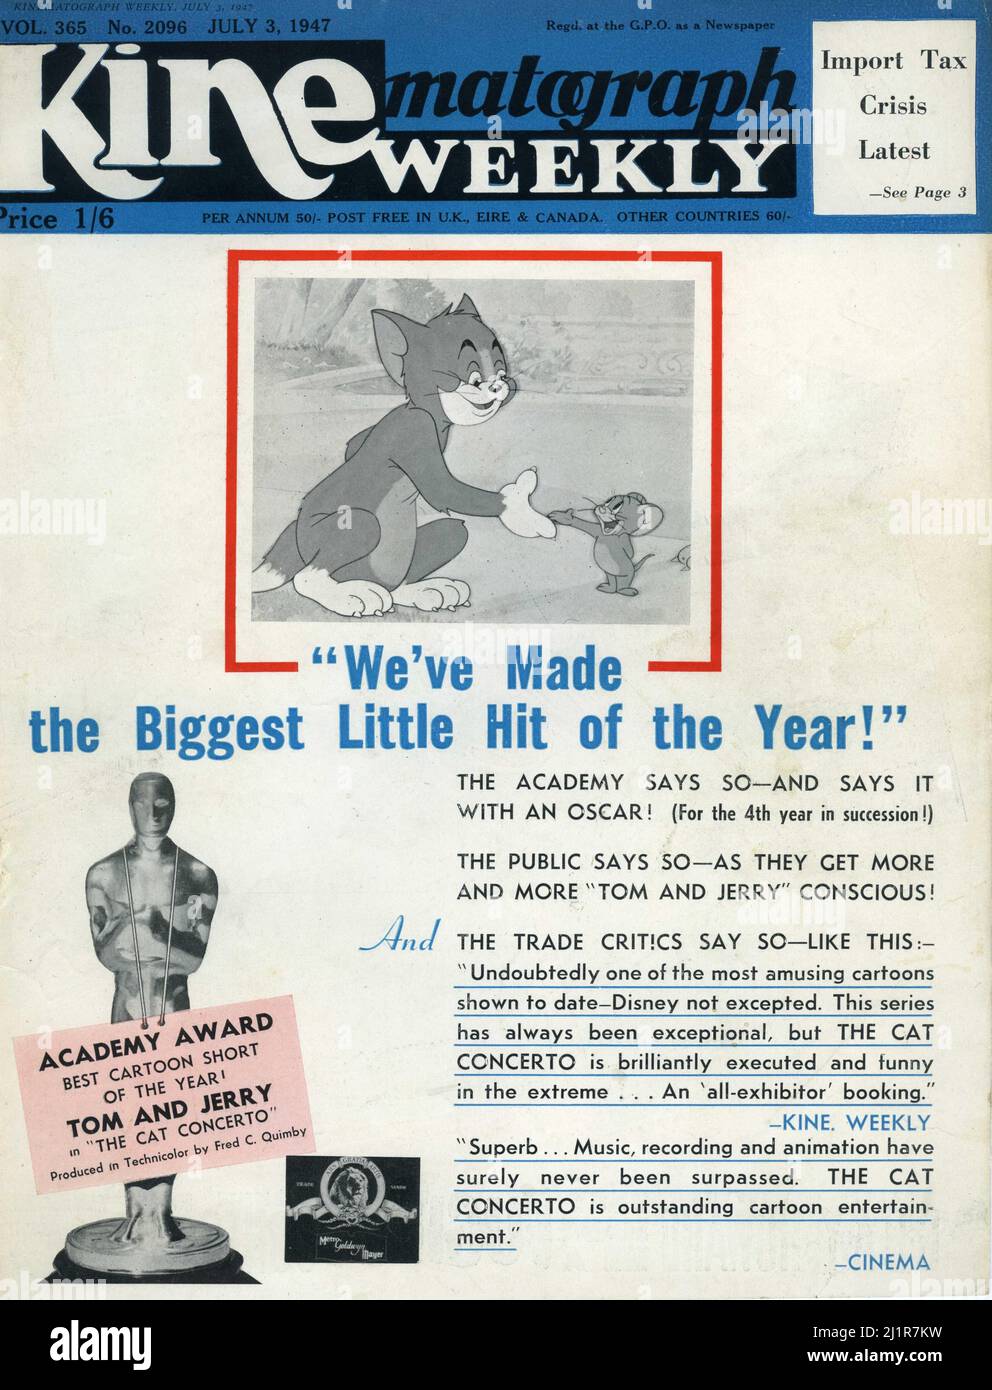 Front Cover of Kinematograph Weekly from July 3rd 1947 advertising the Oscar Winning TOM AND JERRY cartoon short THE CAT CONCERTO 1947 directors / writers JOSEPH BARBERA and WILLIAM HANNA producer FRED QUIMBY Metro Goldwyn Mayer Stock Photo